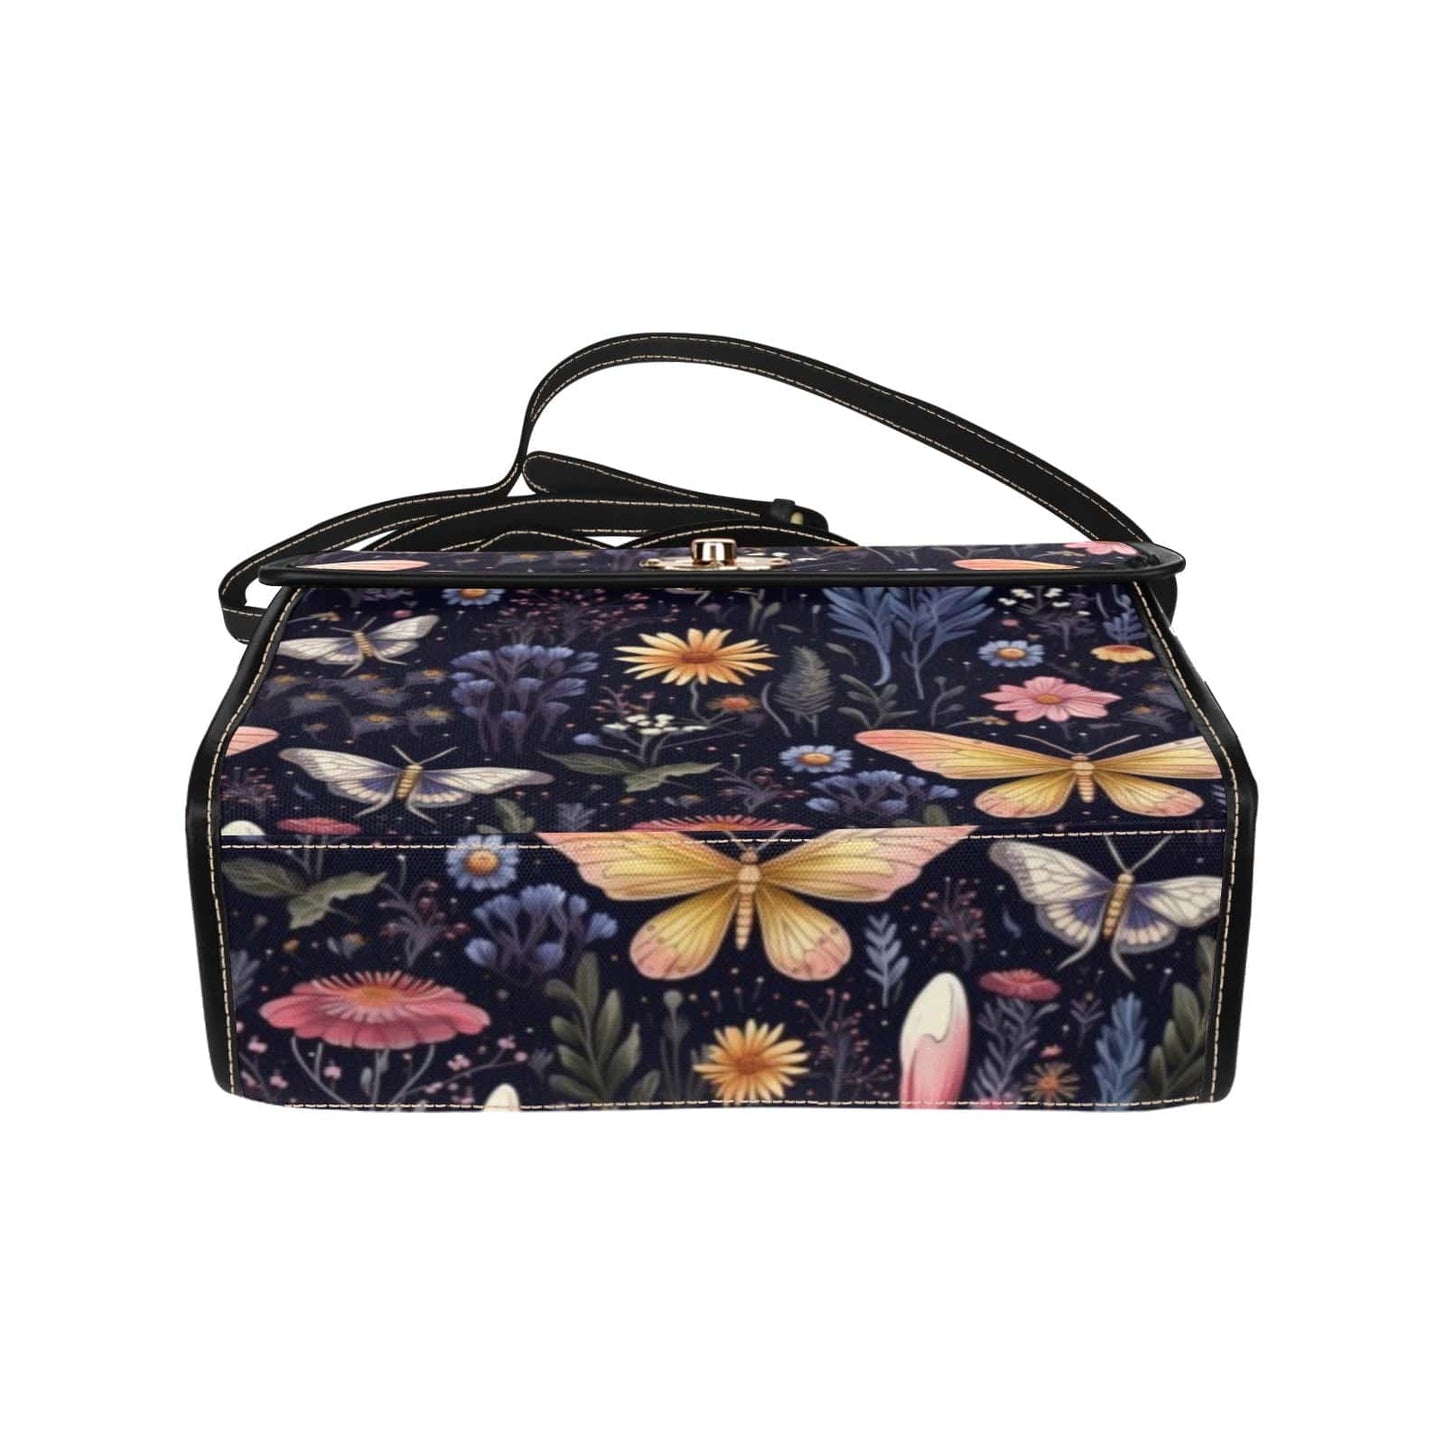 base view of the Stylish boxy satchel handbag featuring vintage style cottagecore midnight garden print featuring beautiful moths and dark florals